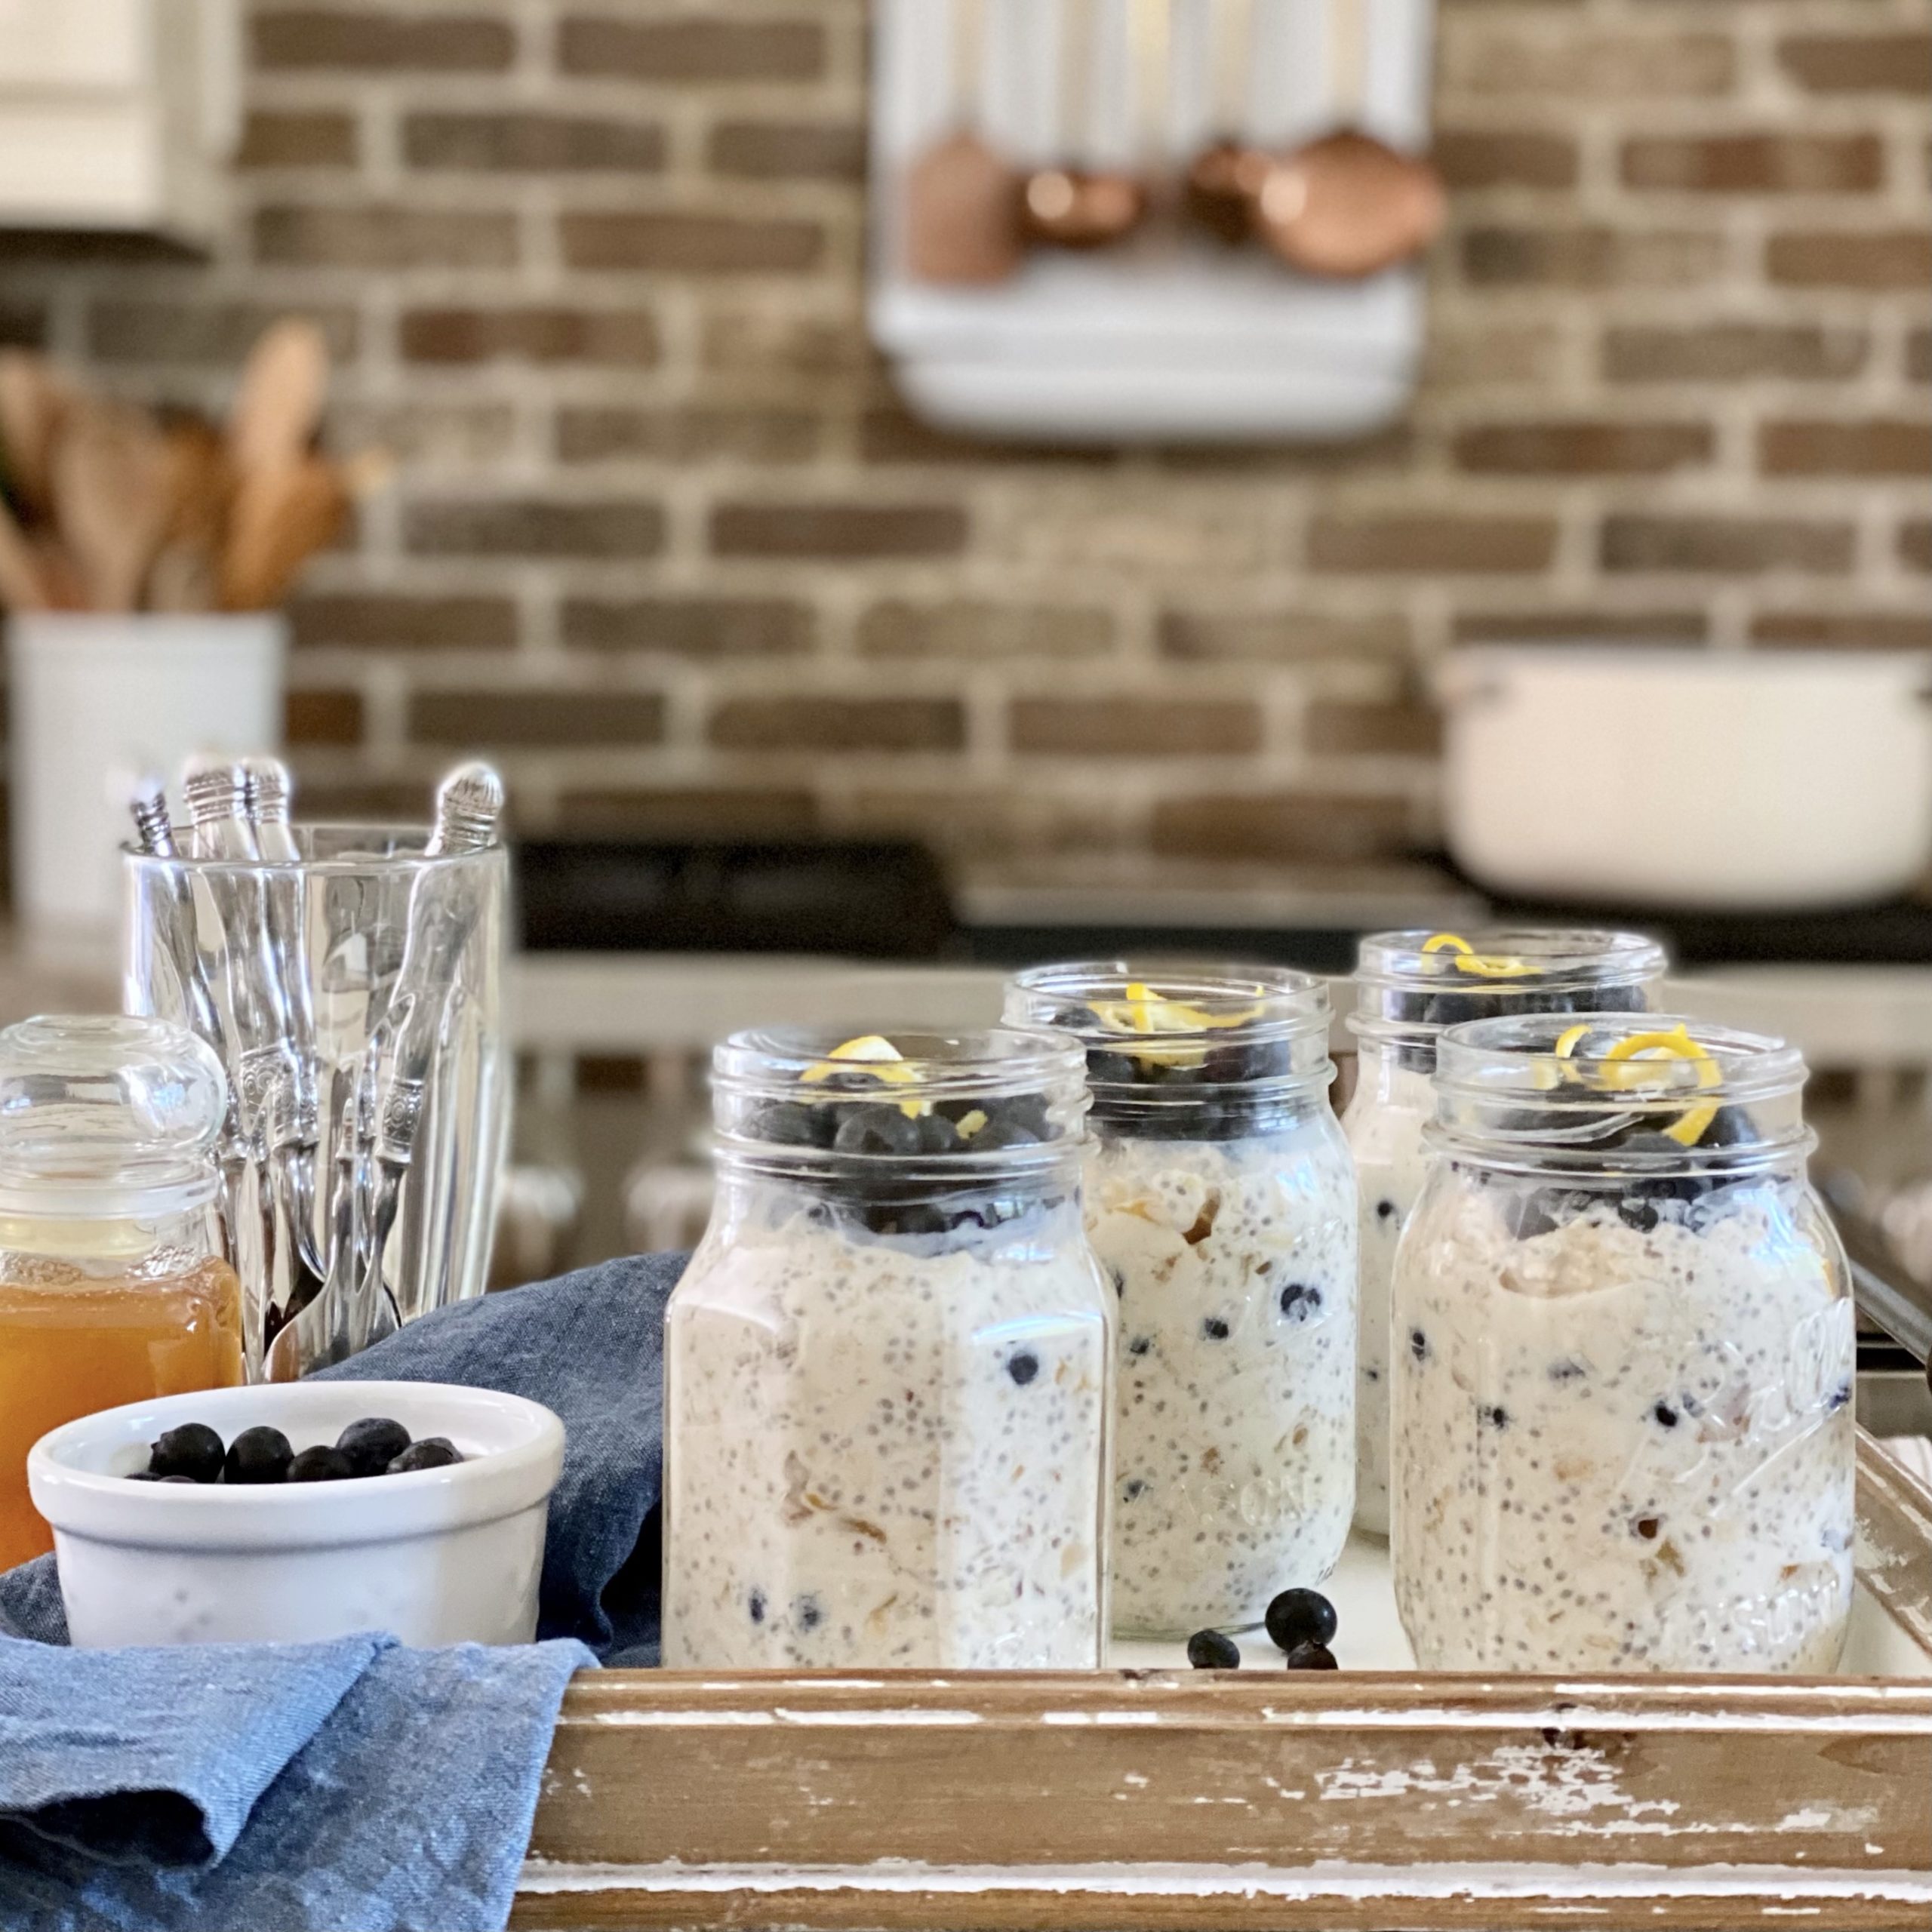 Four jars of overnight oats with blueberries and lemond zest on top on a tray in the kitchen with spoons , extra blueberries in a dish, and honey.